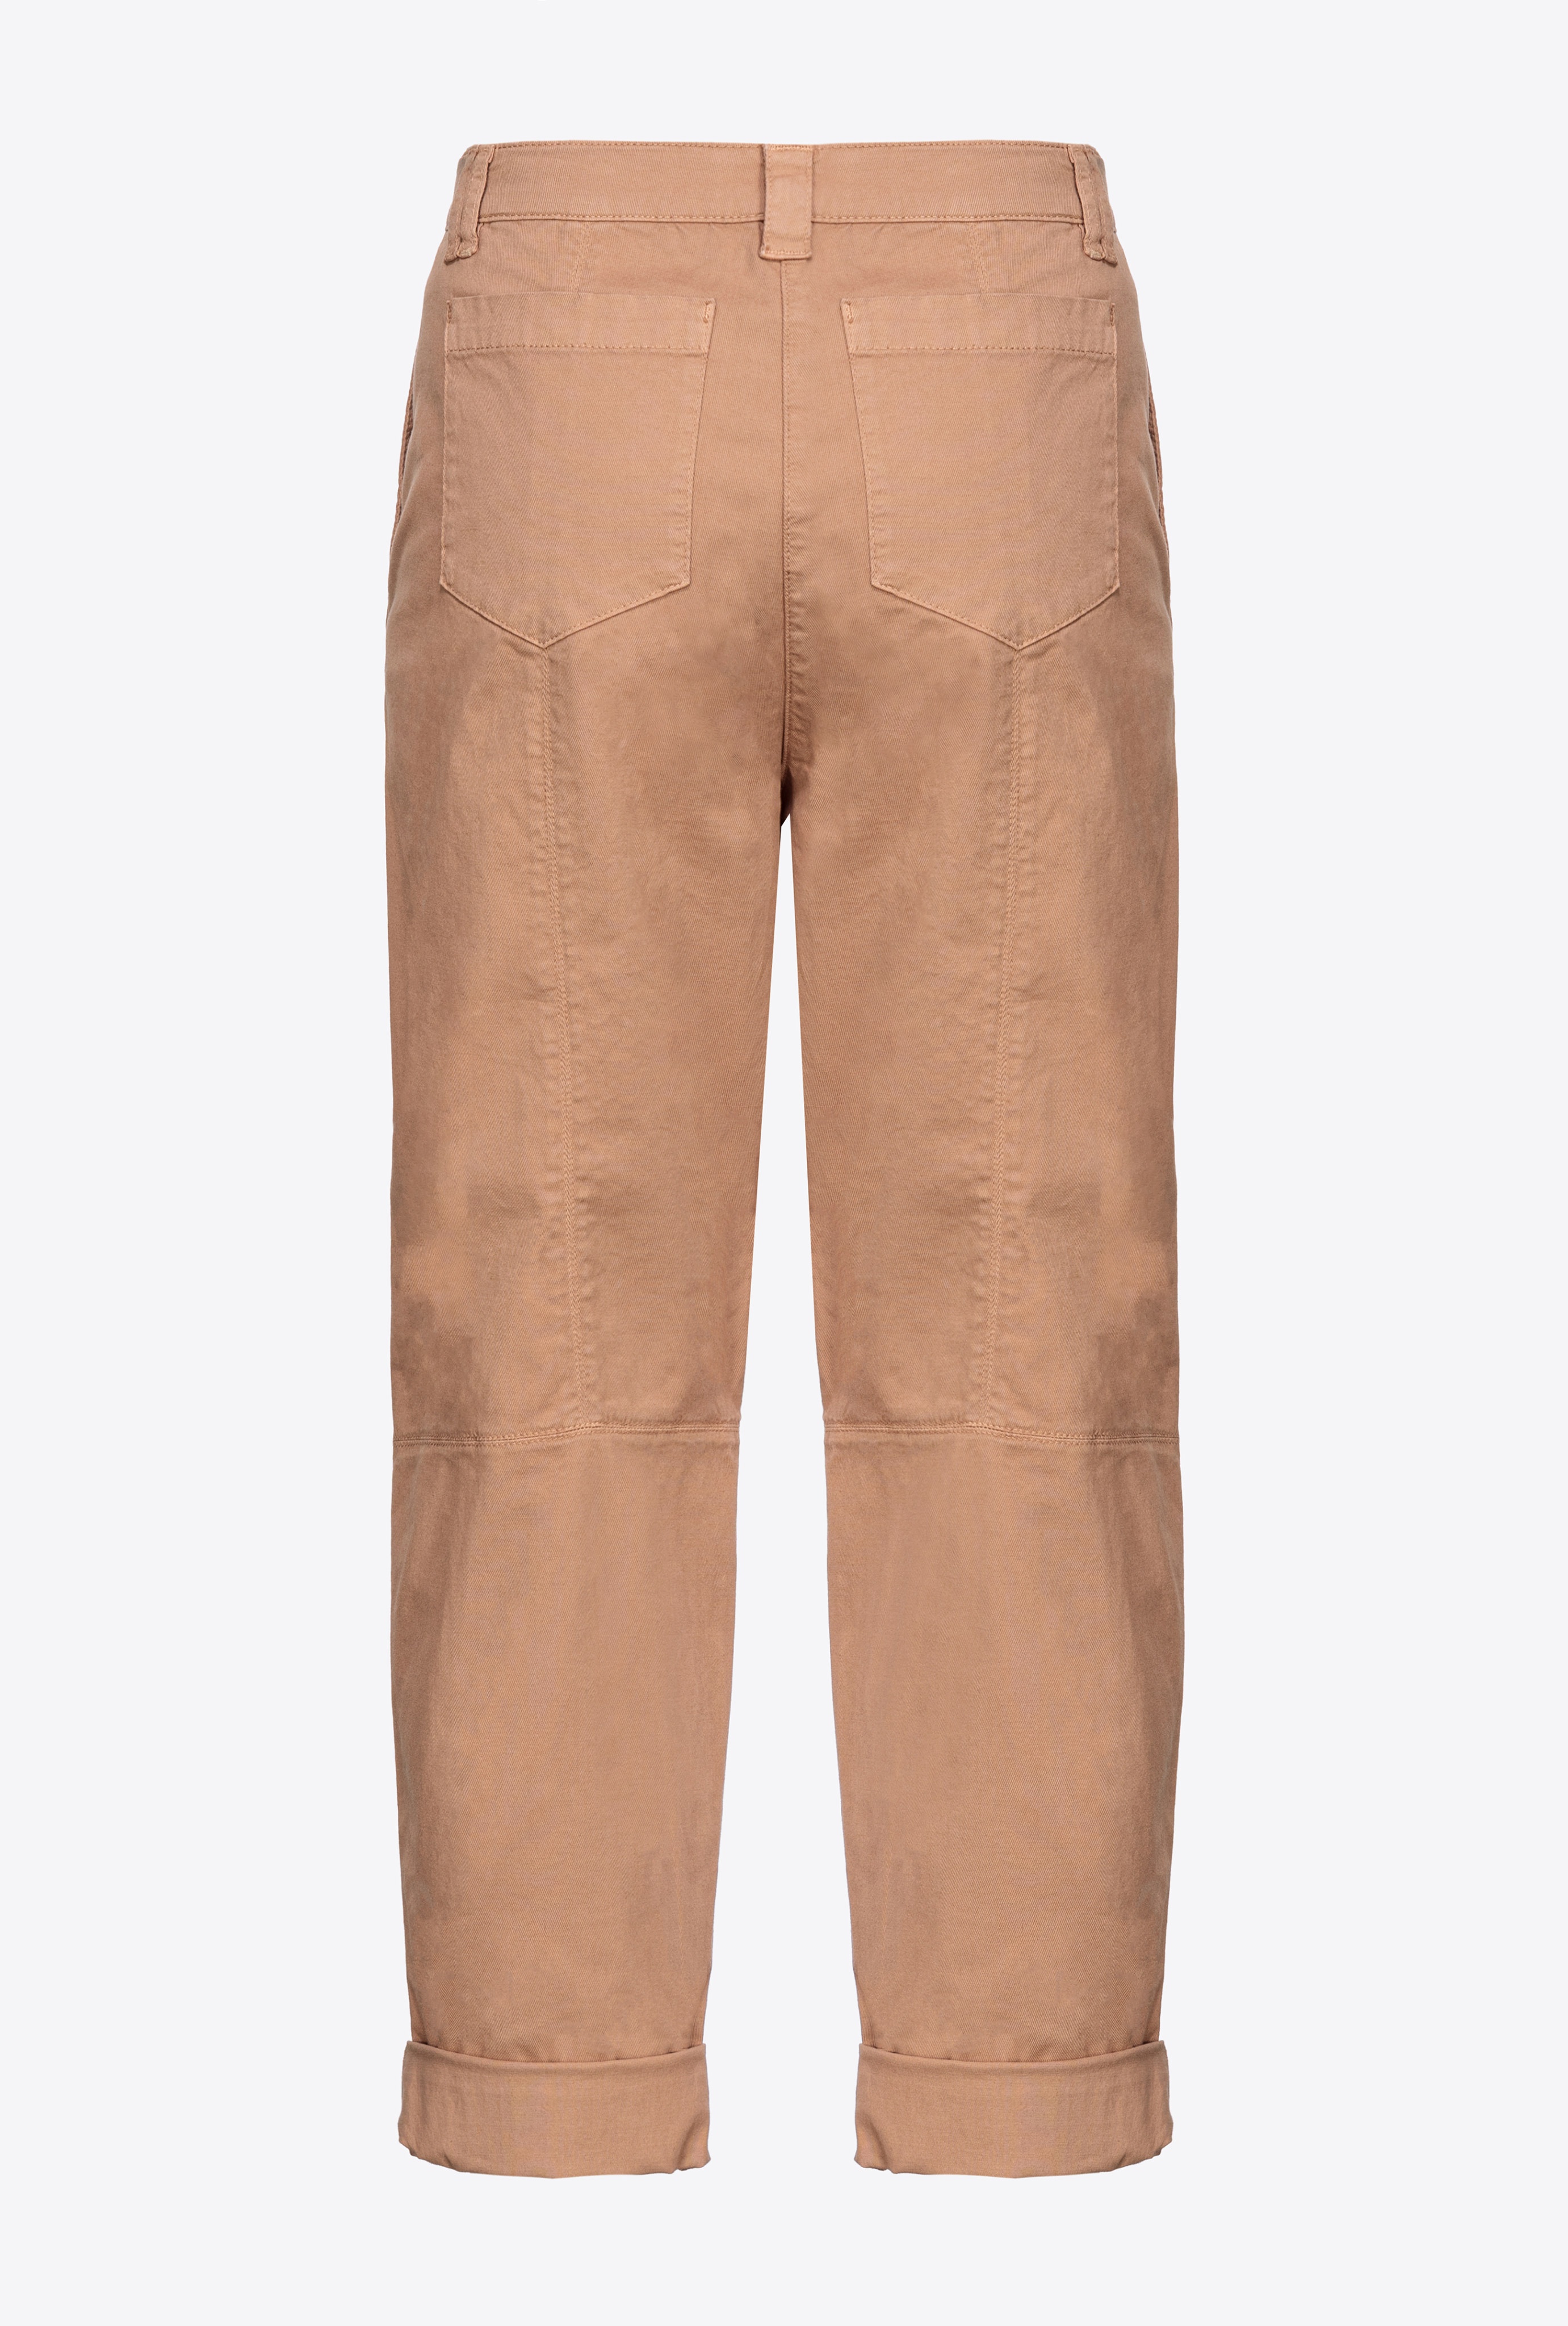 CAVALRY FABRIC CARROT TROUSERS - 7